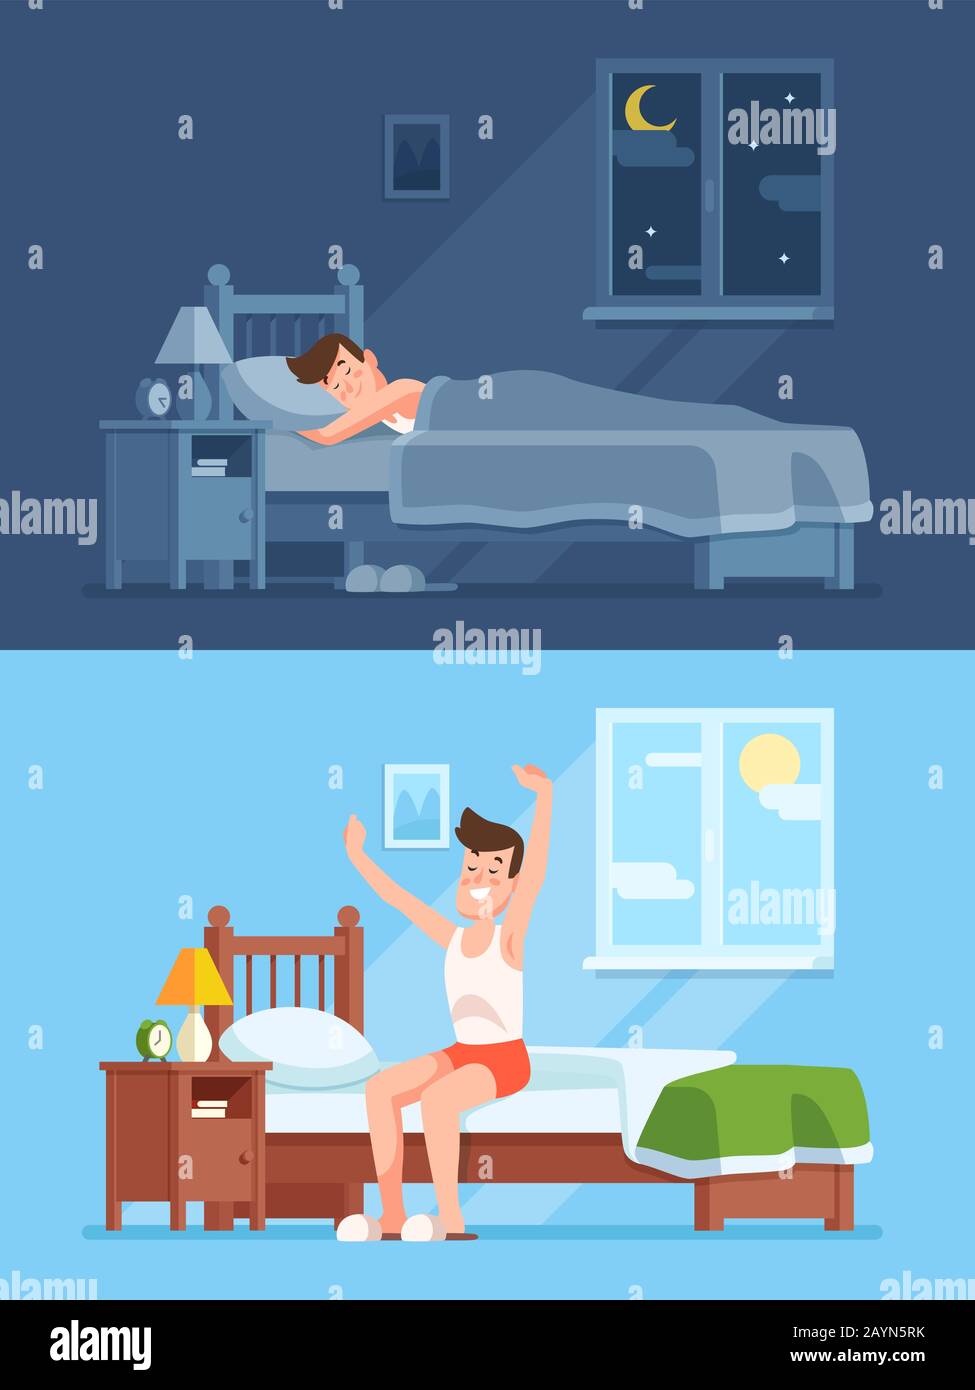 Man sleeping under duvet at night, waking up morning and getting out of bed. Peacefully sleep in comfy bedding cartoon vector concept Stock Vector